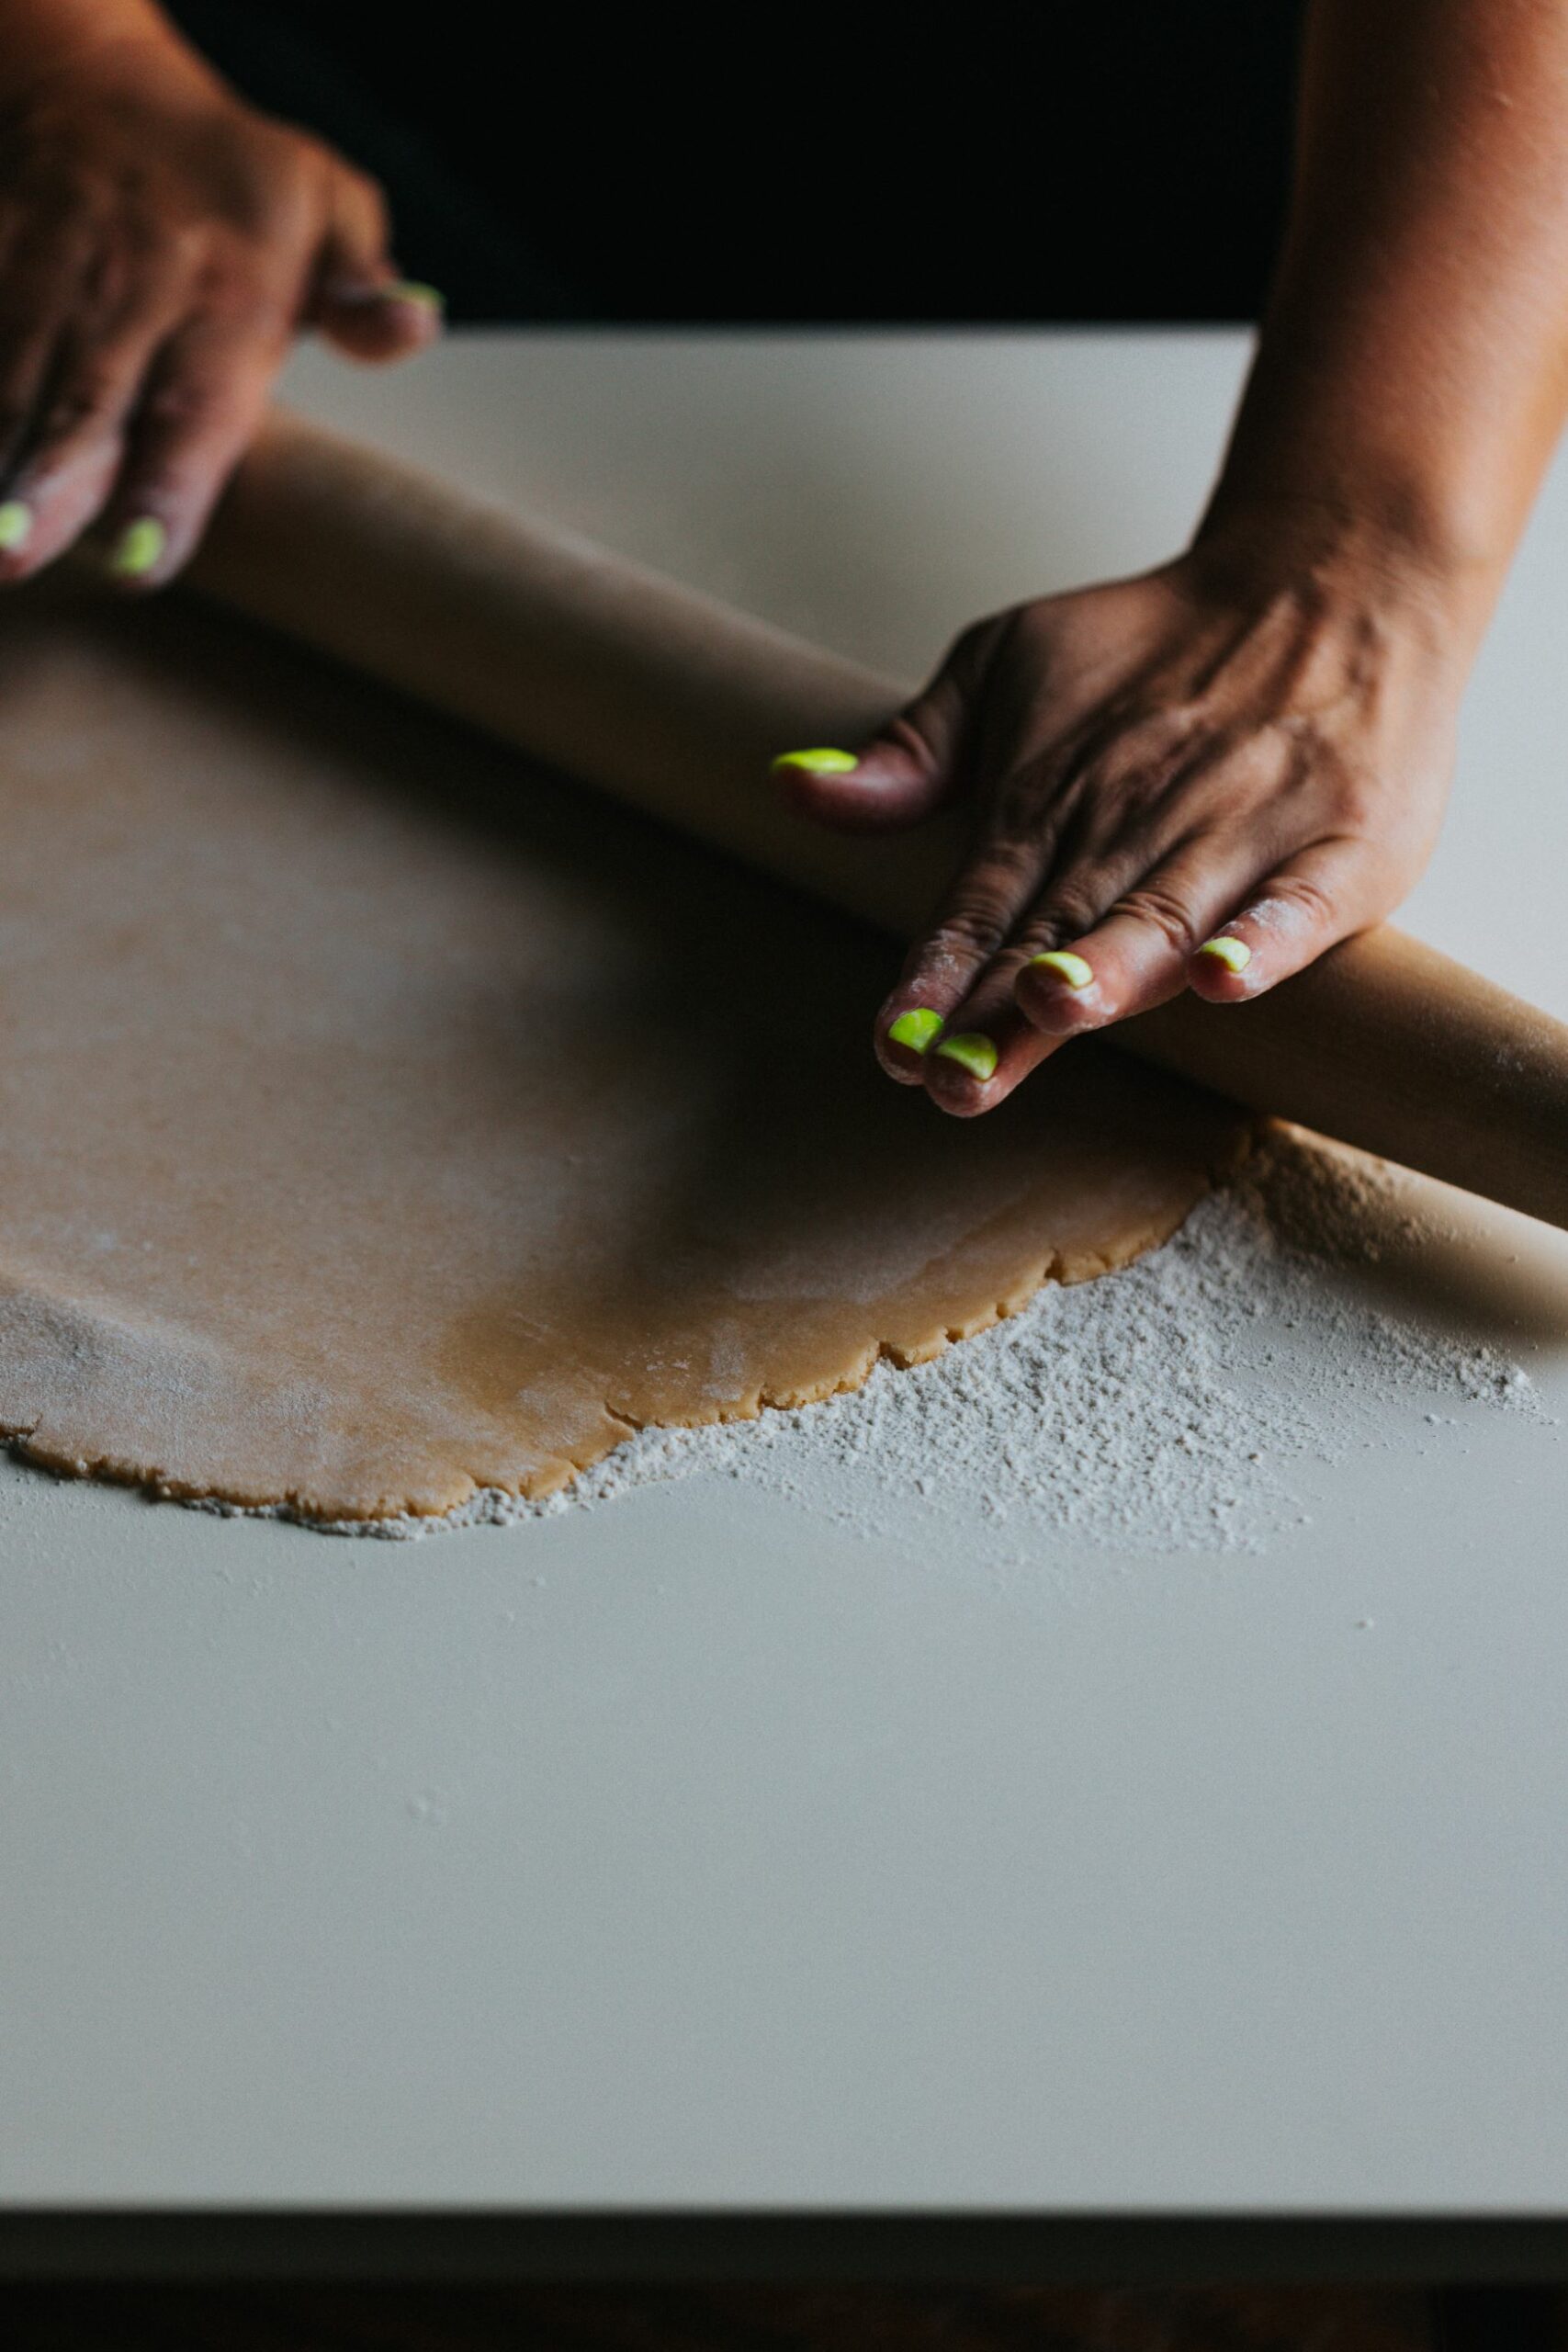 An image of someone using a rolling pin.